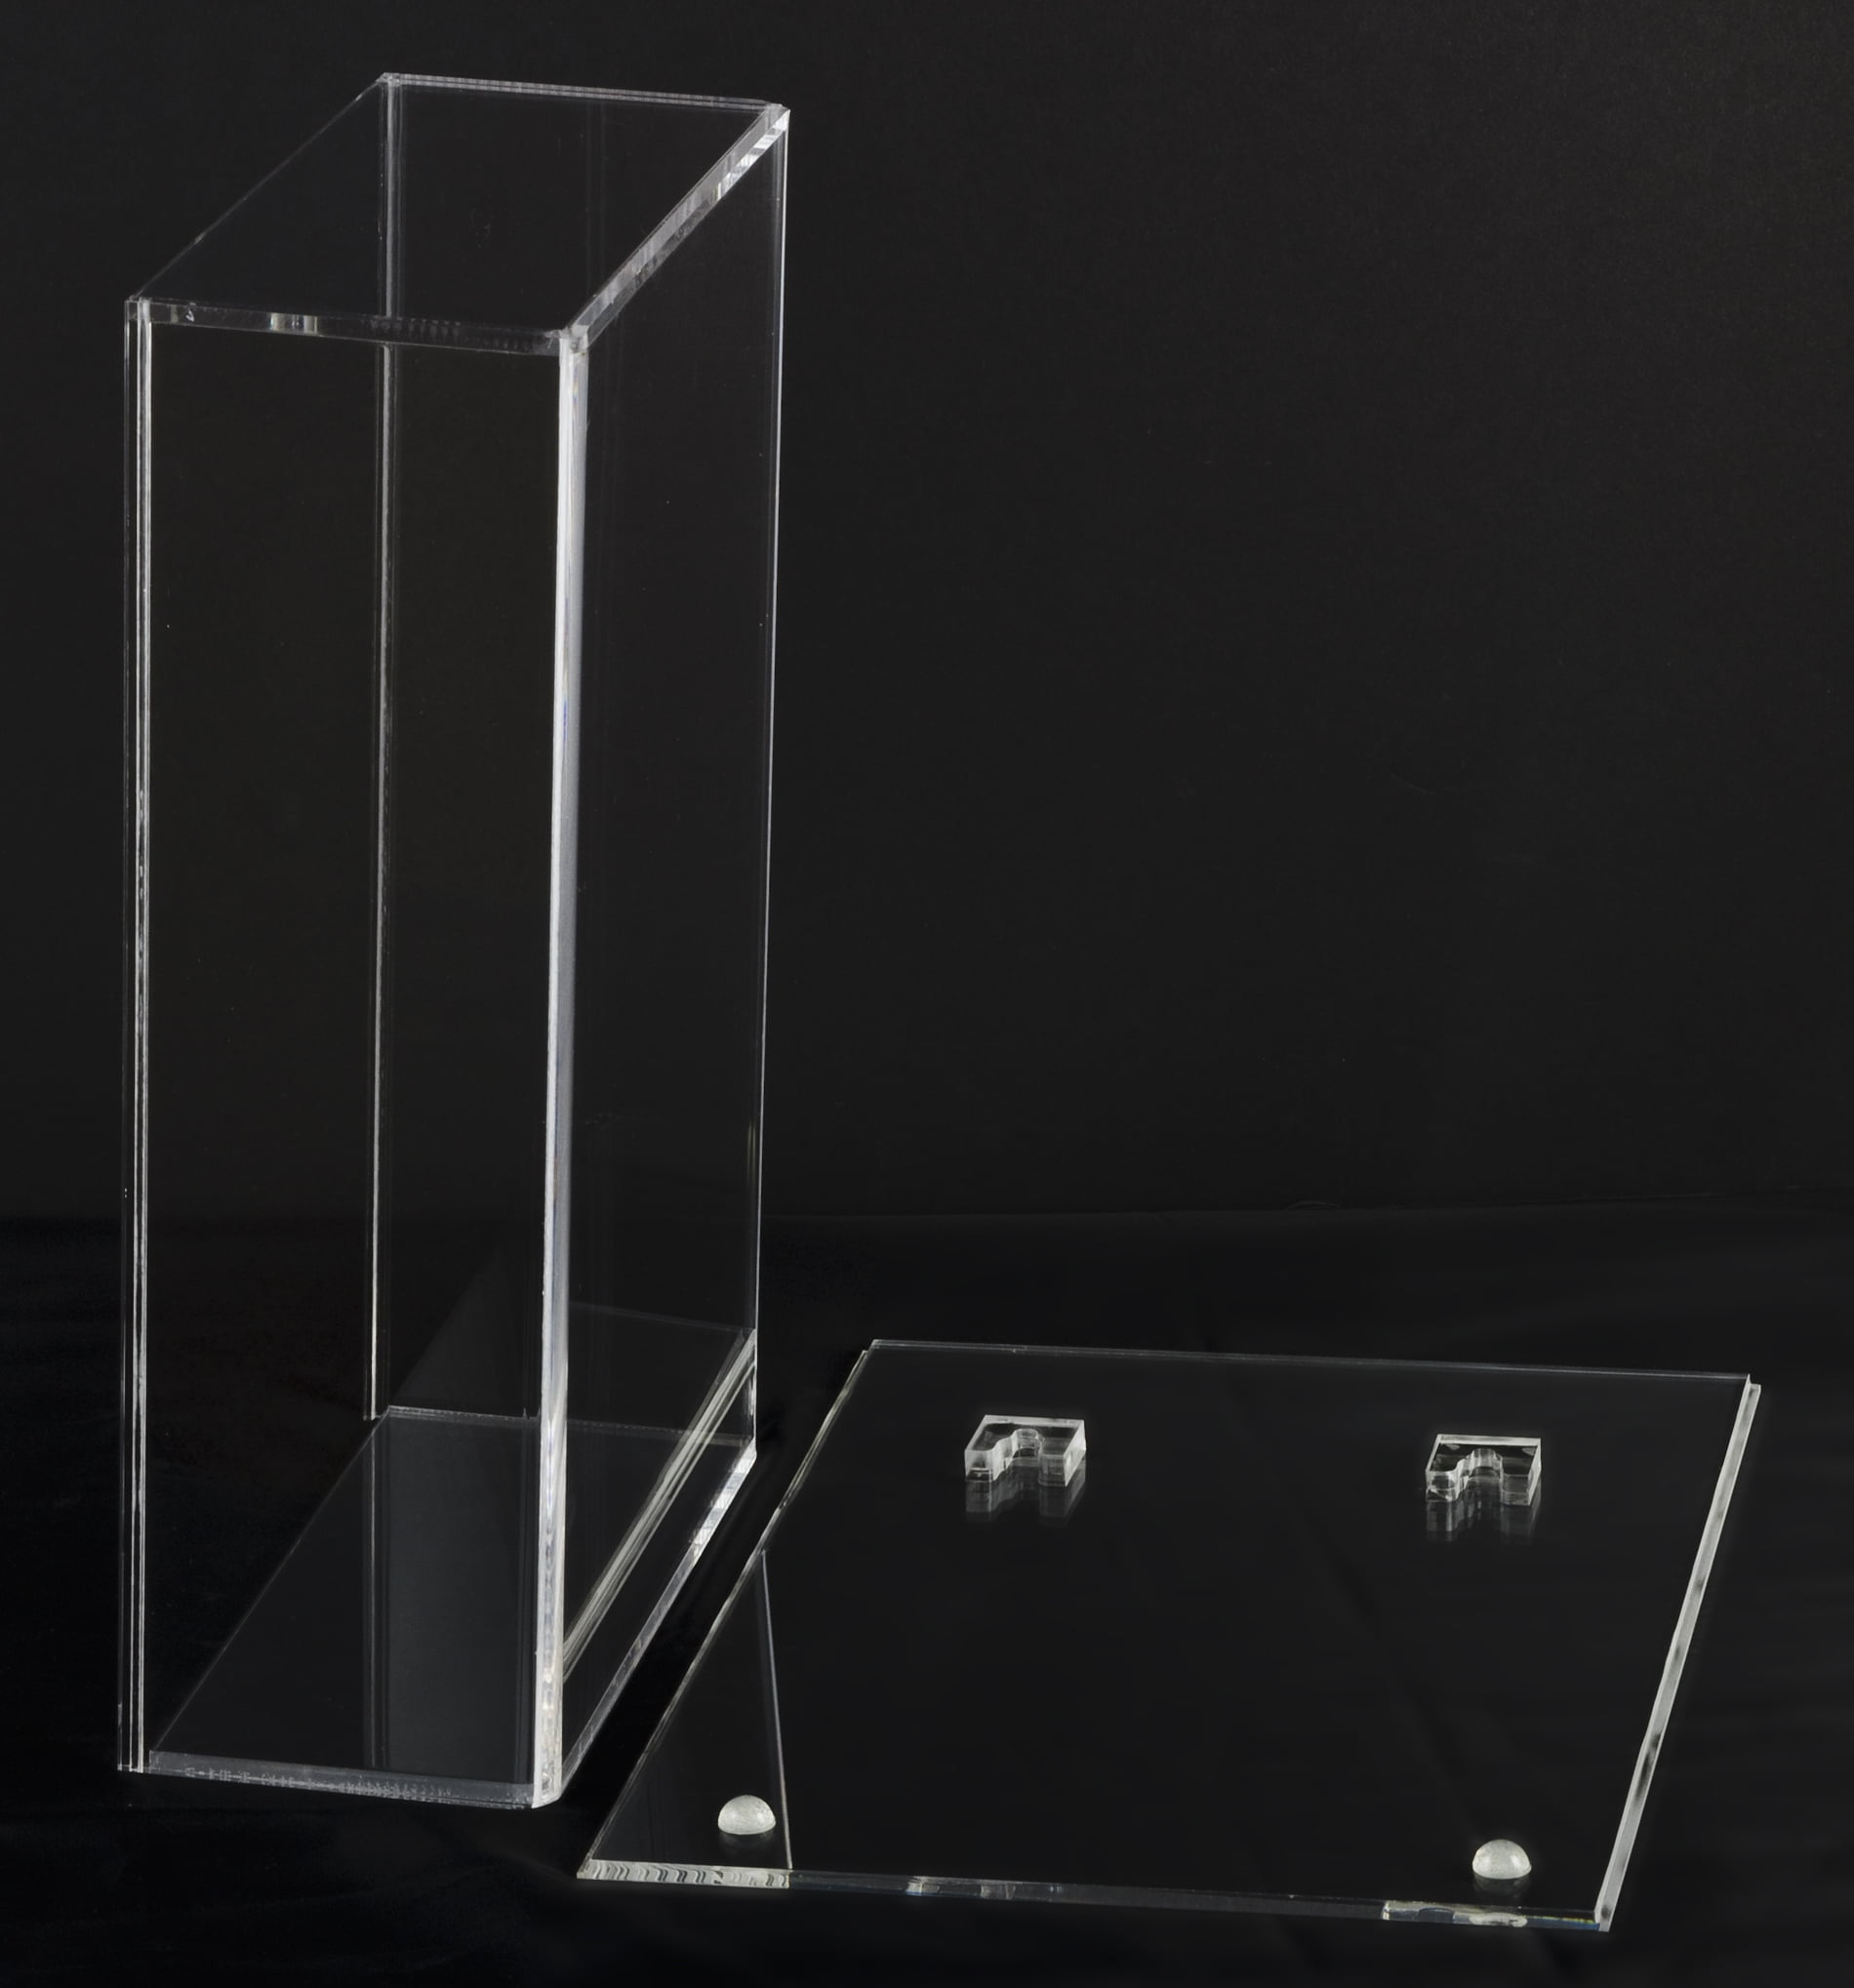 Deluxe Clear Acrylic Book Display Case (a030-a)